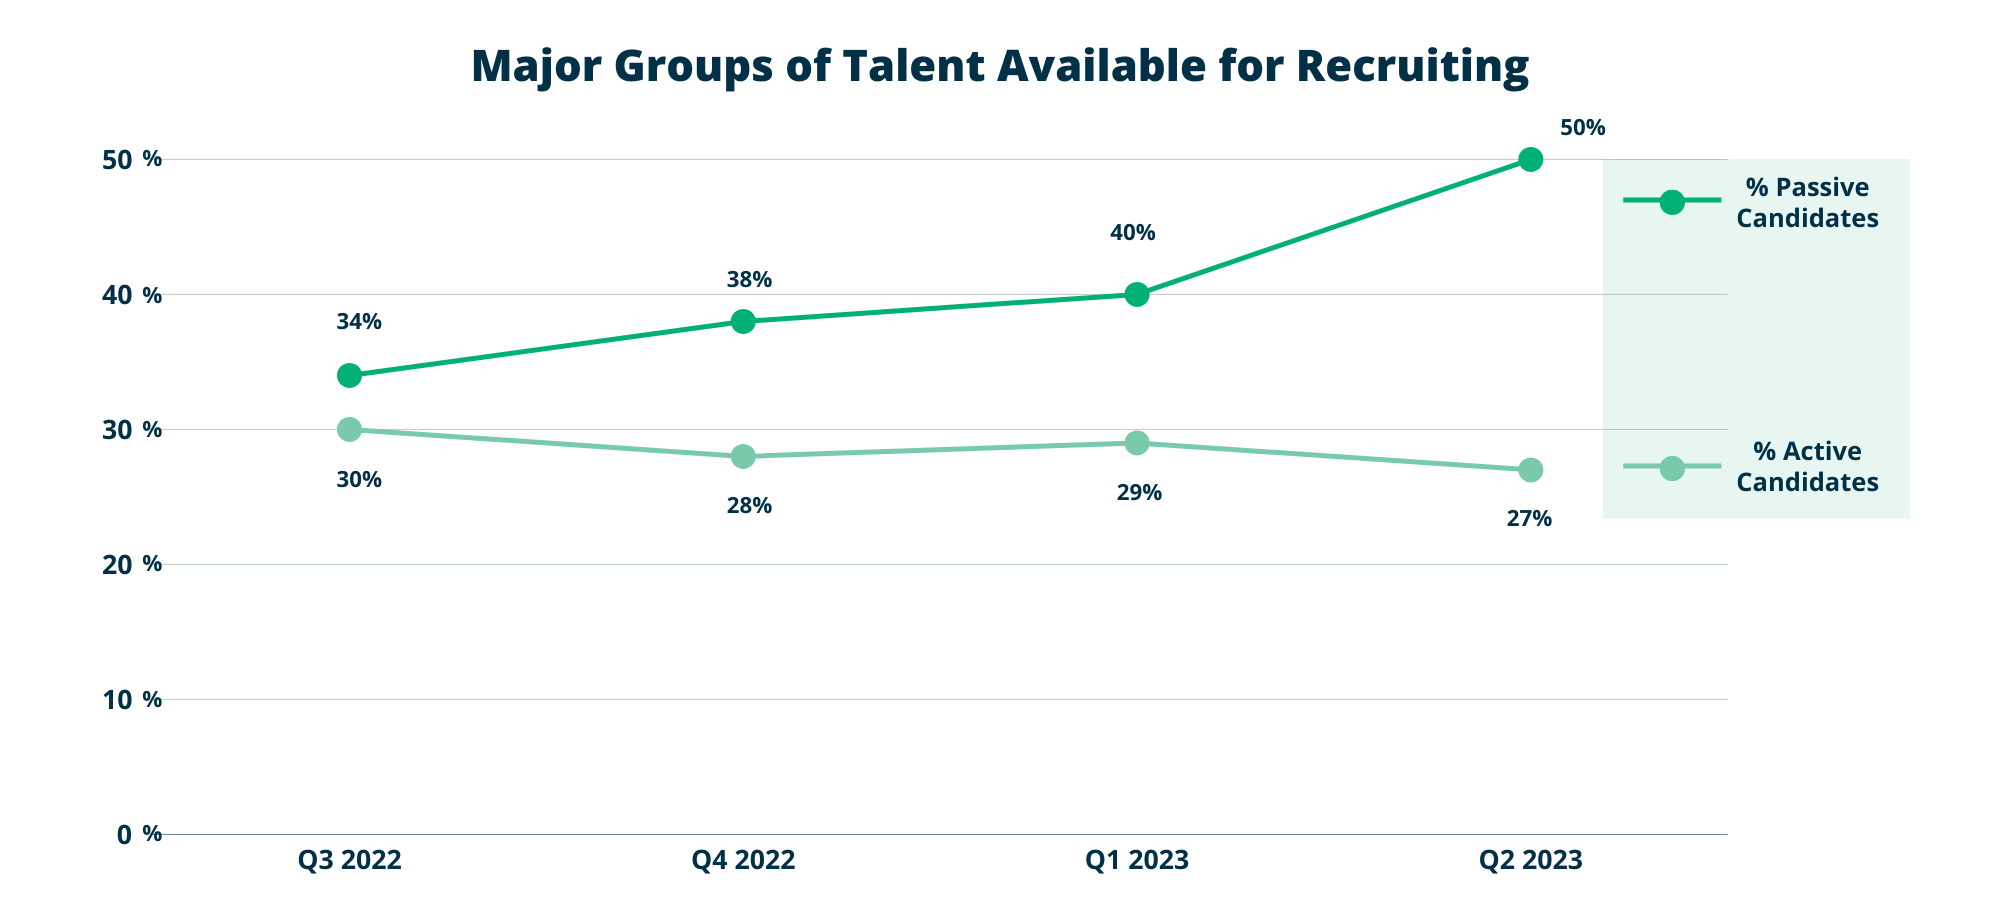 A graph representing Major Groups of Talent Available for Recruiting